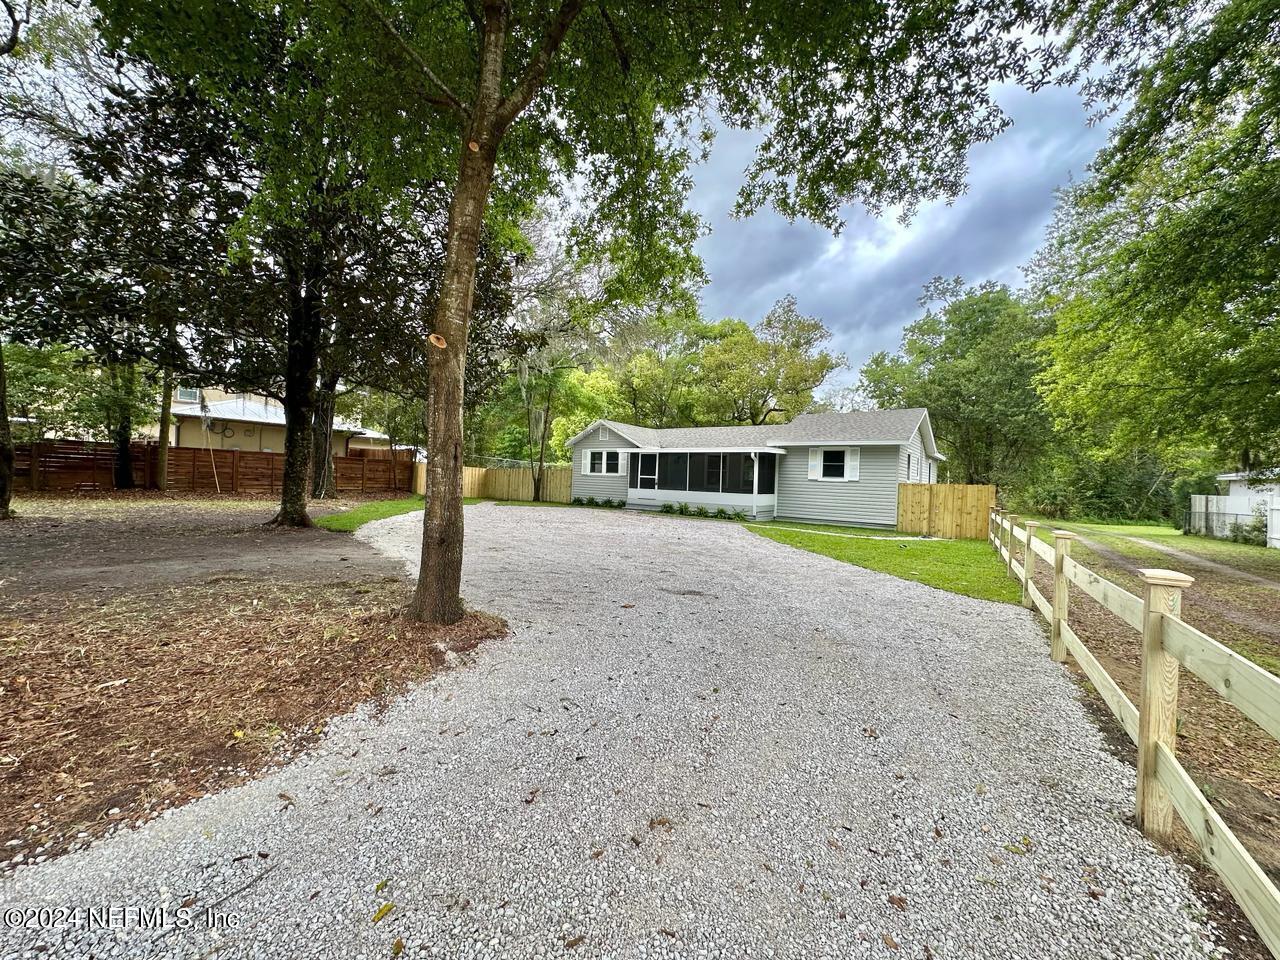 Jacksonville, FL home for sale located at 2450 ANNISTON Road, Jacksonville, FL 32246